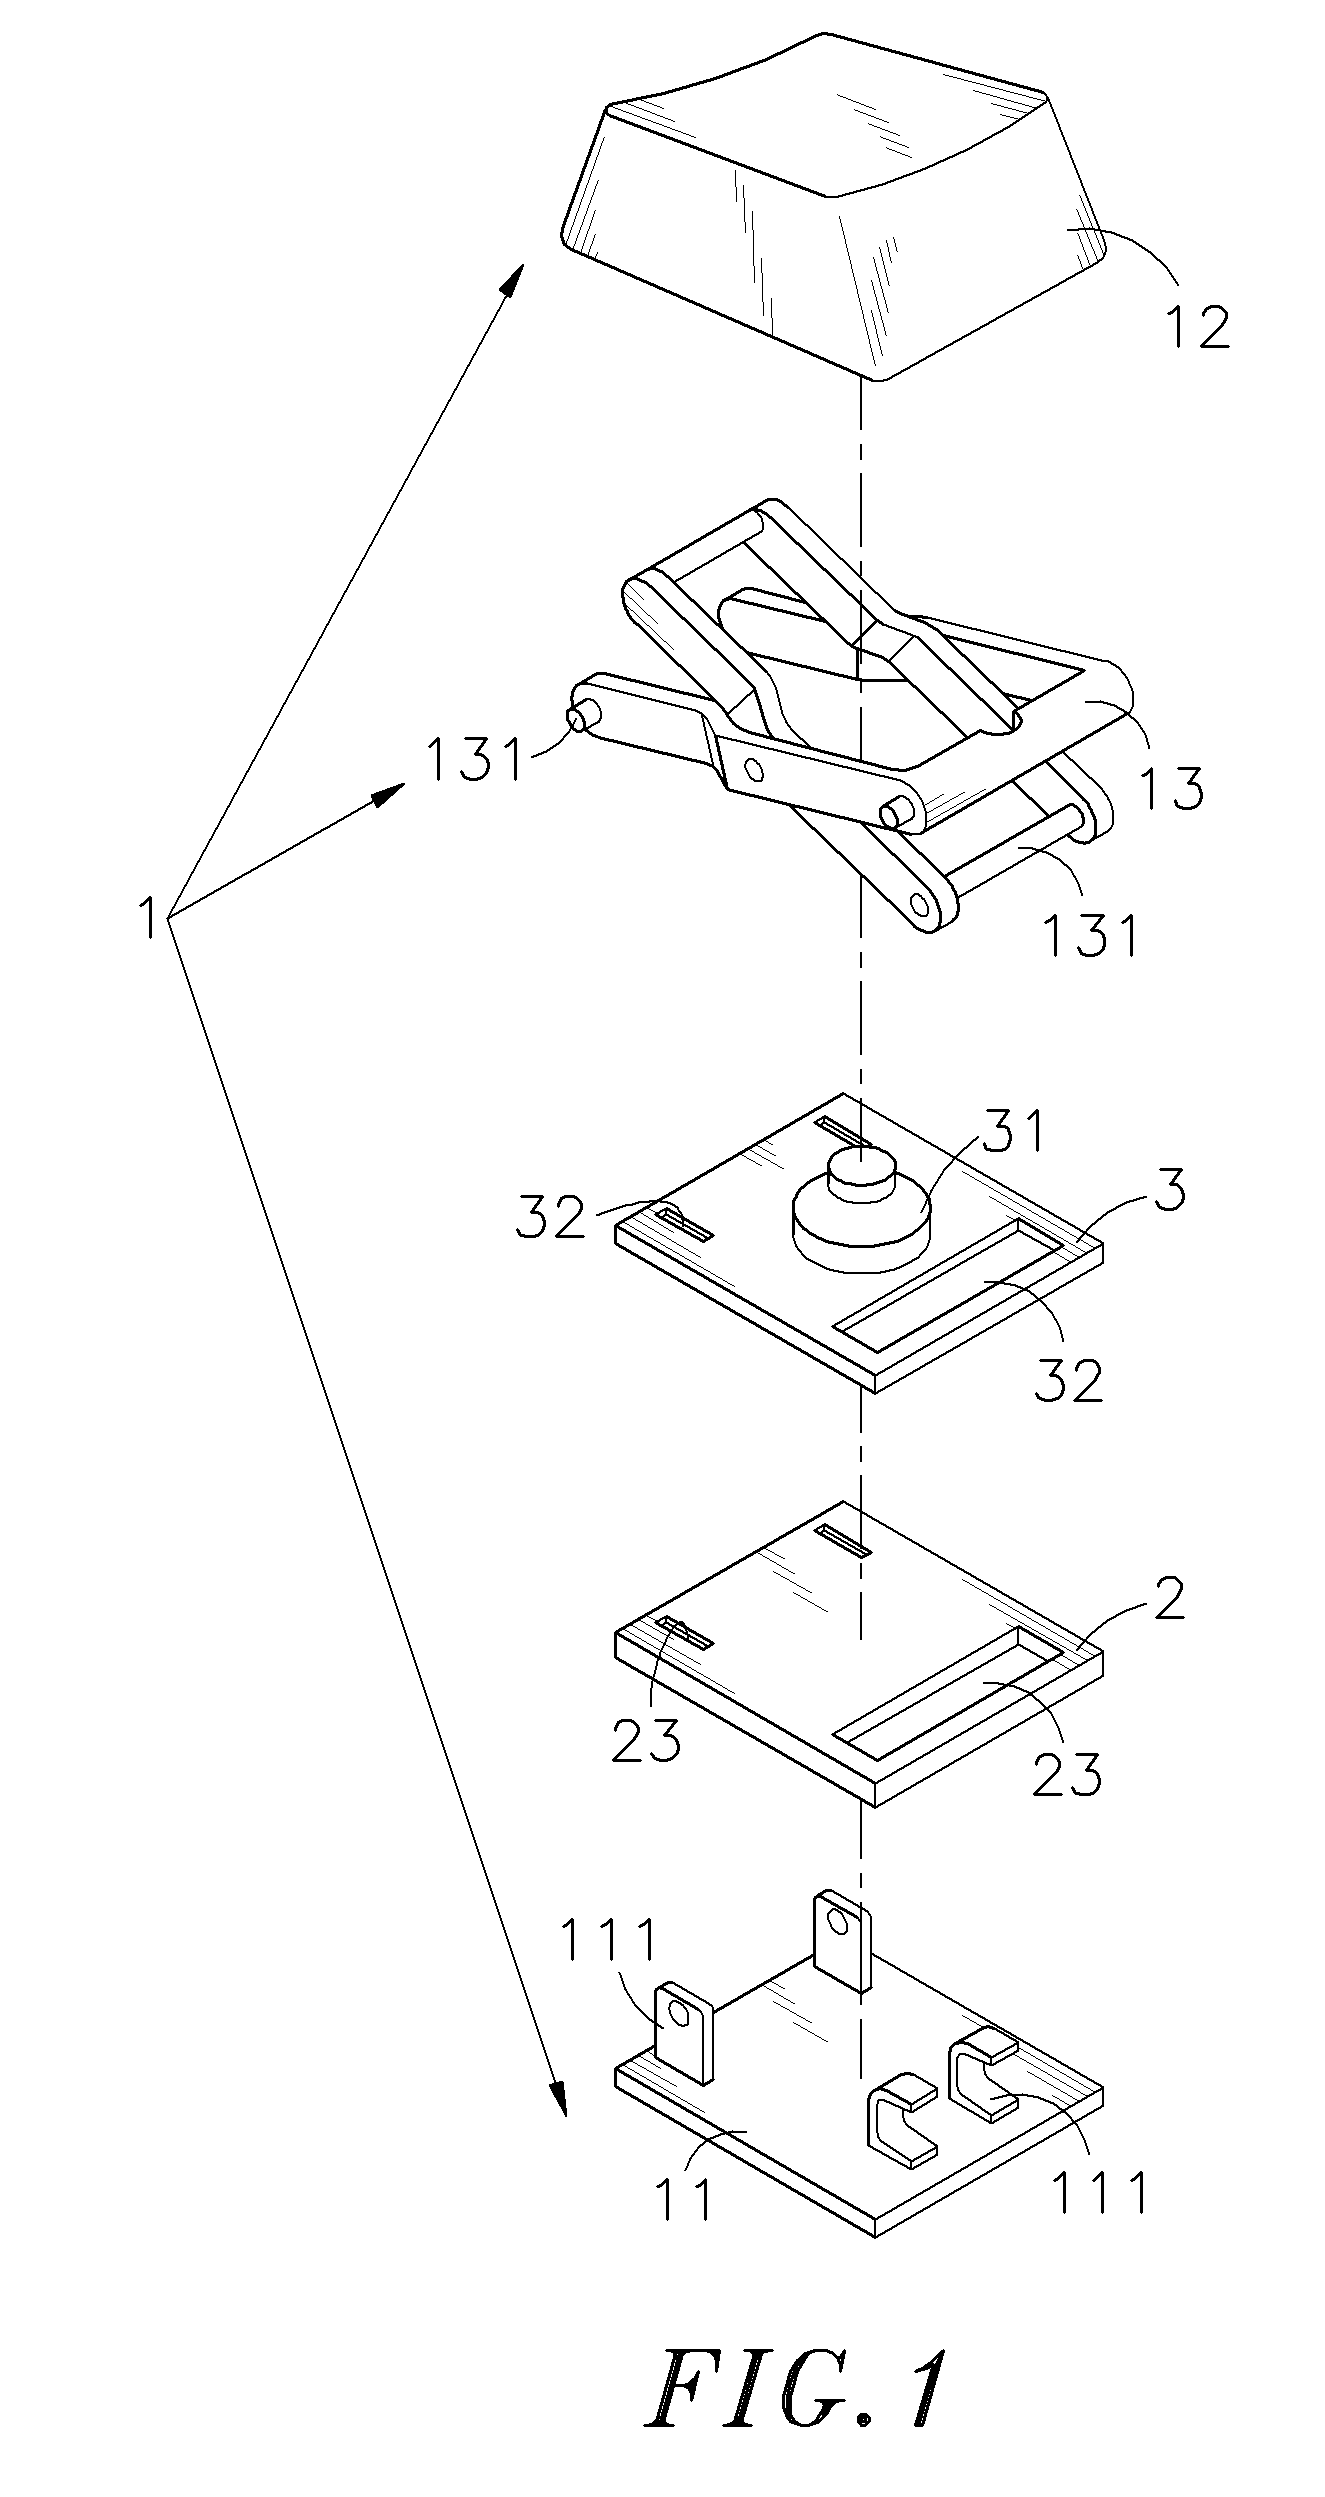 Keyboard structure with a self-luminous circuit board